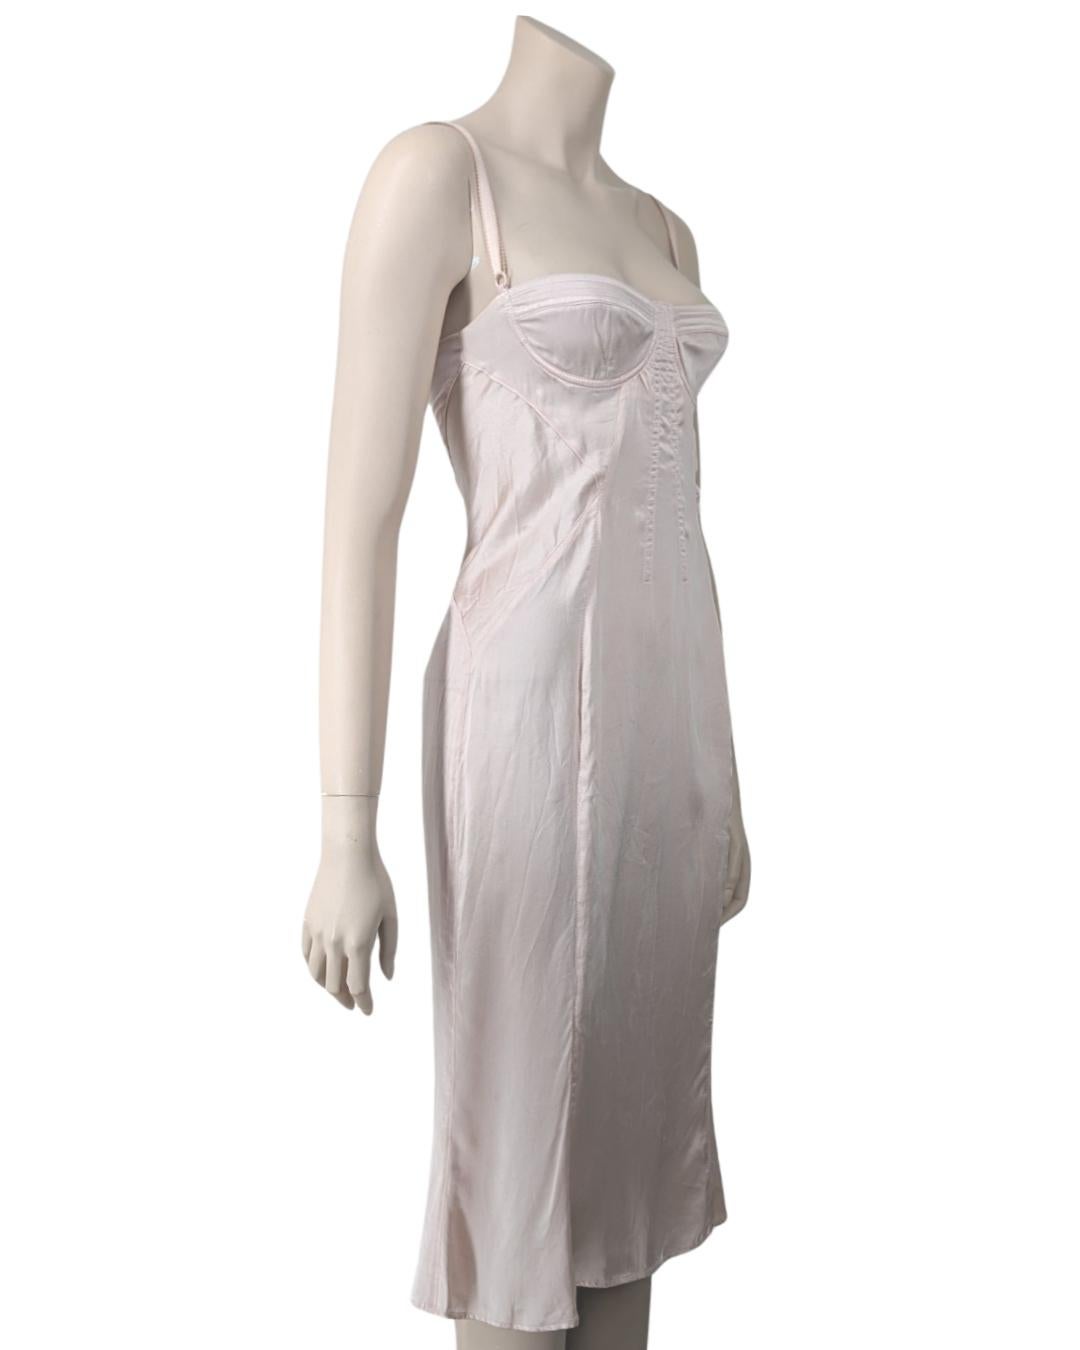 D&G Light Pink Iconic Silk Corset Dress For Sale 1